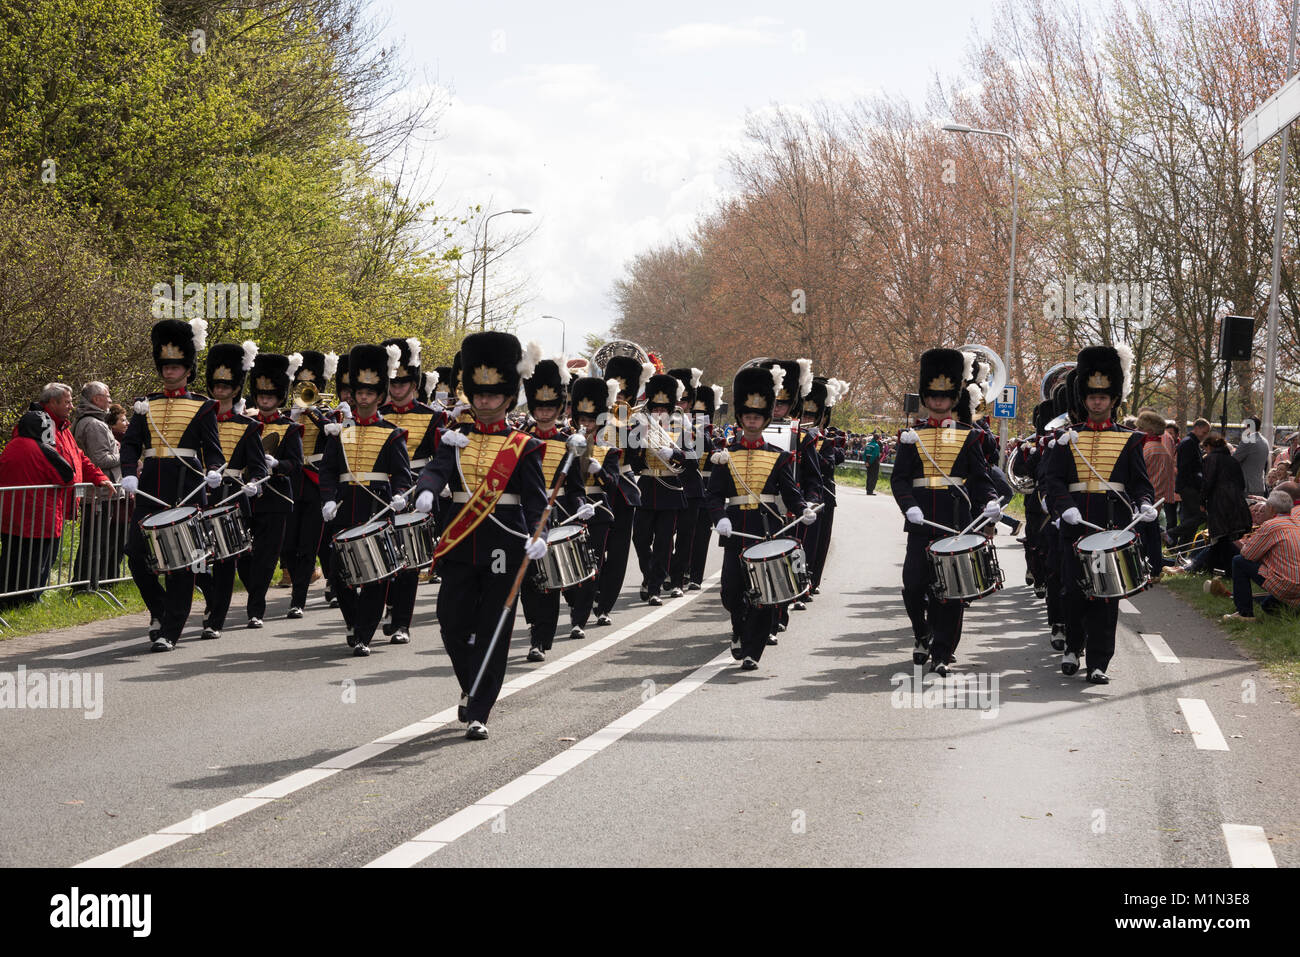 The Drum and Showband Adest Musica, a marching band from Sassenheim in Holland, taking part in the annual flower parade. The parade  involves  twenty  Stock Photo